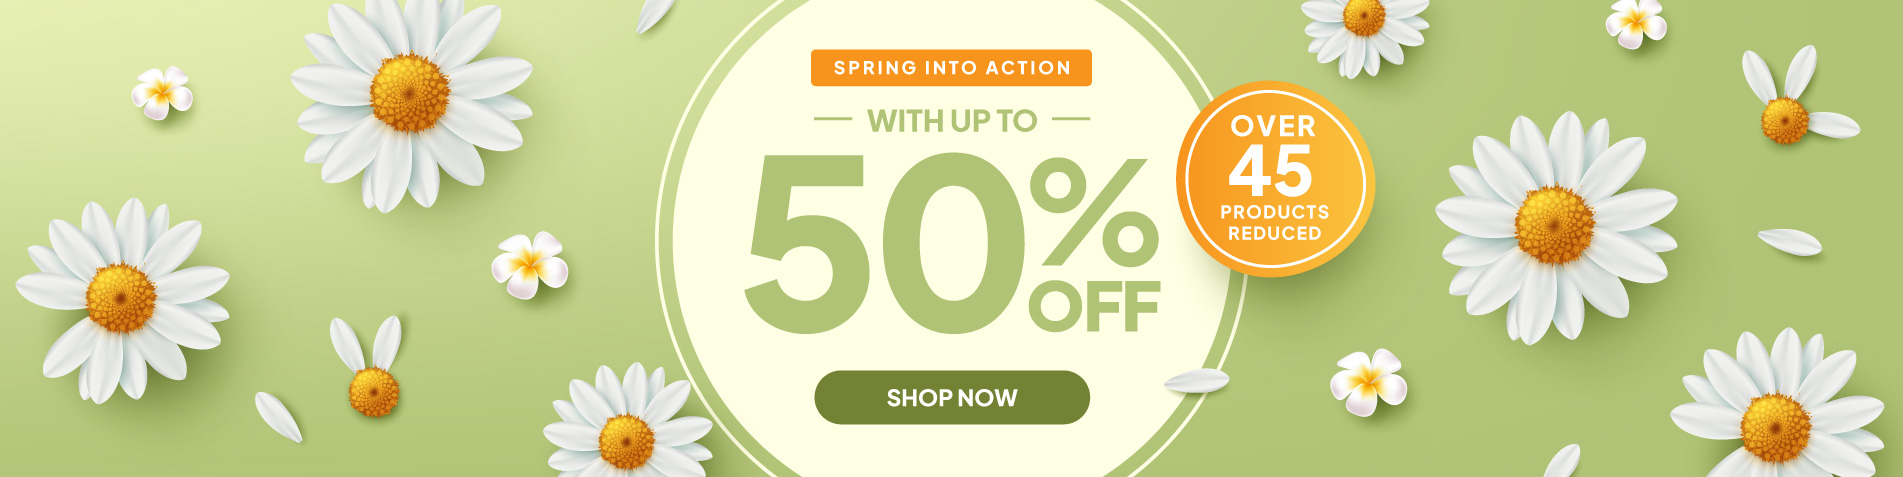 Spring into action - with up to 50% off - over 45 products reduced.